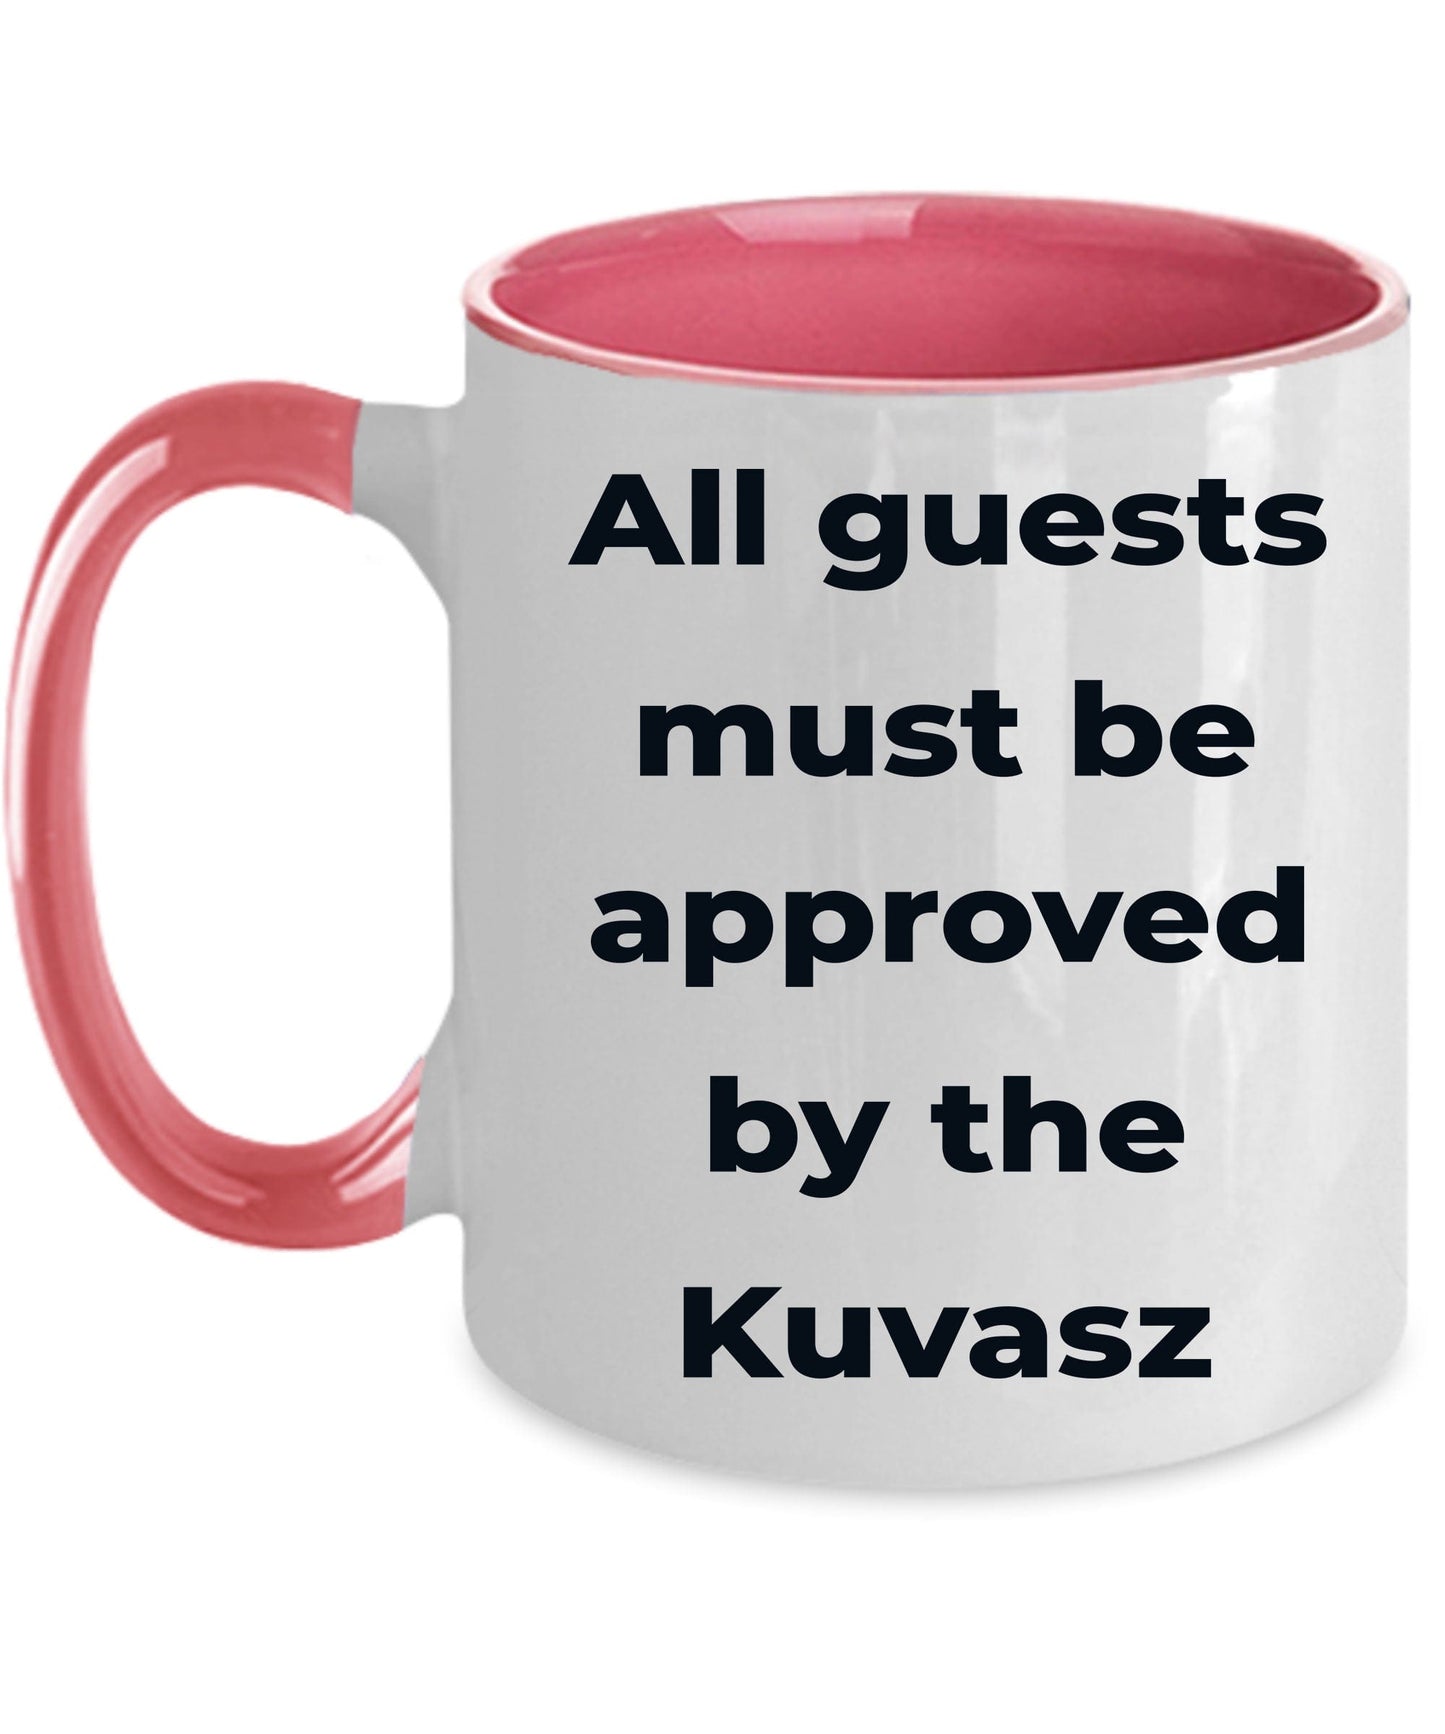 Kuvasz Dog funny Coffee Mug - All guests must be approved by the Kuvasz